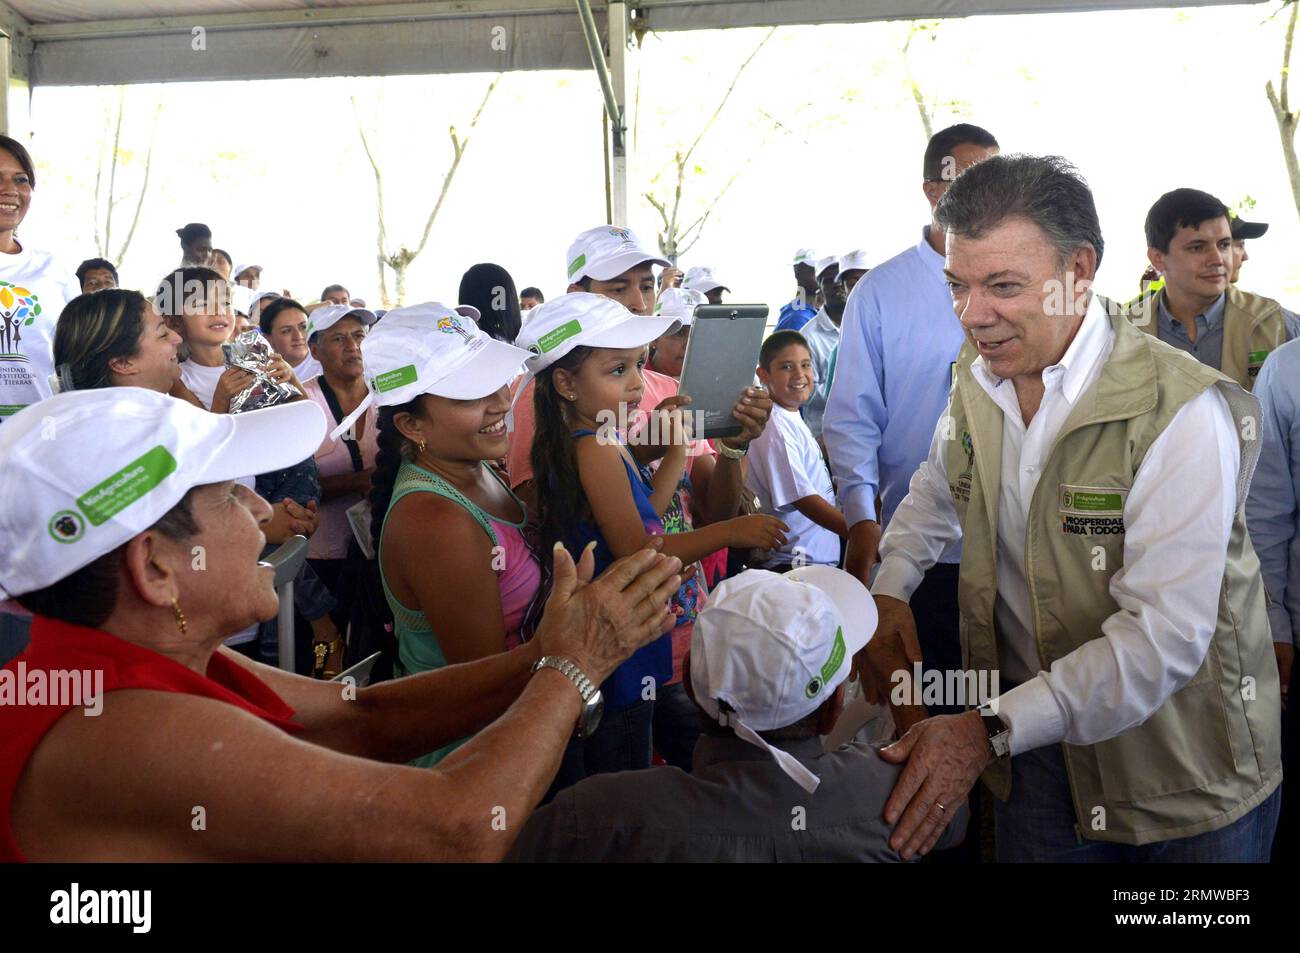 Image provided by Colombia s Presidency, shows Colombian President, Juan Manuel Santos (R), taking part during an act of delivery of lands to farmers victims of land grab, in Jamundi, Cauca Valley, Colombia, on Oct. 18, 2014. Juan Pablo Bello/Colombia s Presidency) (bxq) COLOMBIA-JAMUNDI-POLITICS-SANTOS e COLOMBIA SxPRESIDENCY PUBLICATIONxNOTxINxCHN   Image provided by Colombia S Presidency Shows Colombian President Juan Manuel Santos r Taking Part during to ACT of Delivery of lands to Farmers Victims of Country Grave in   Valley Colombia ON OCT 18 2014 Juan Pablo Bello Colombia S Presidency Stock Photo